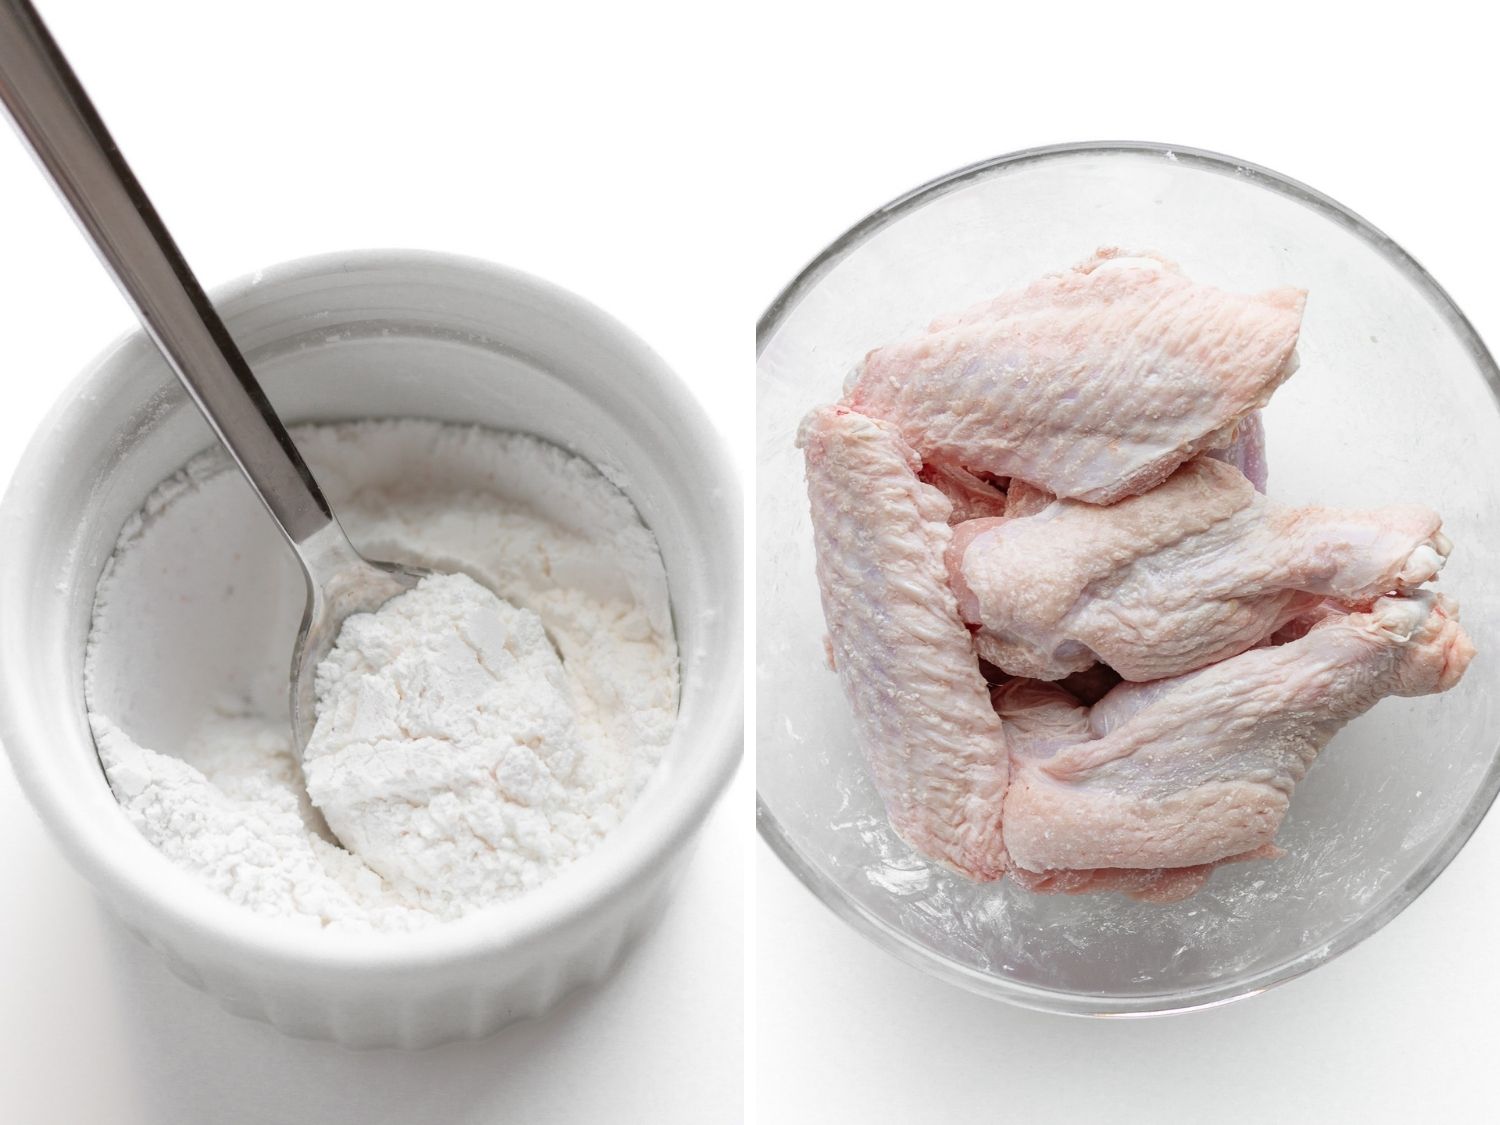 Photo collage showing baking powder and salt being mixed in a small bowl next to a large glass bowl of turkey wings tossed in the mixture.